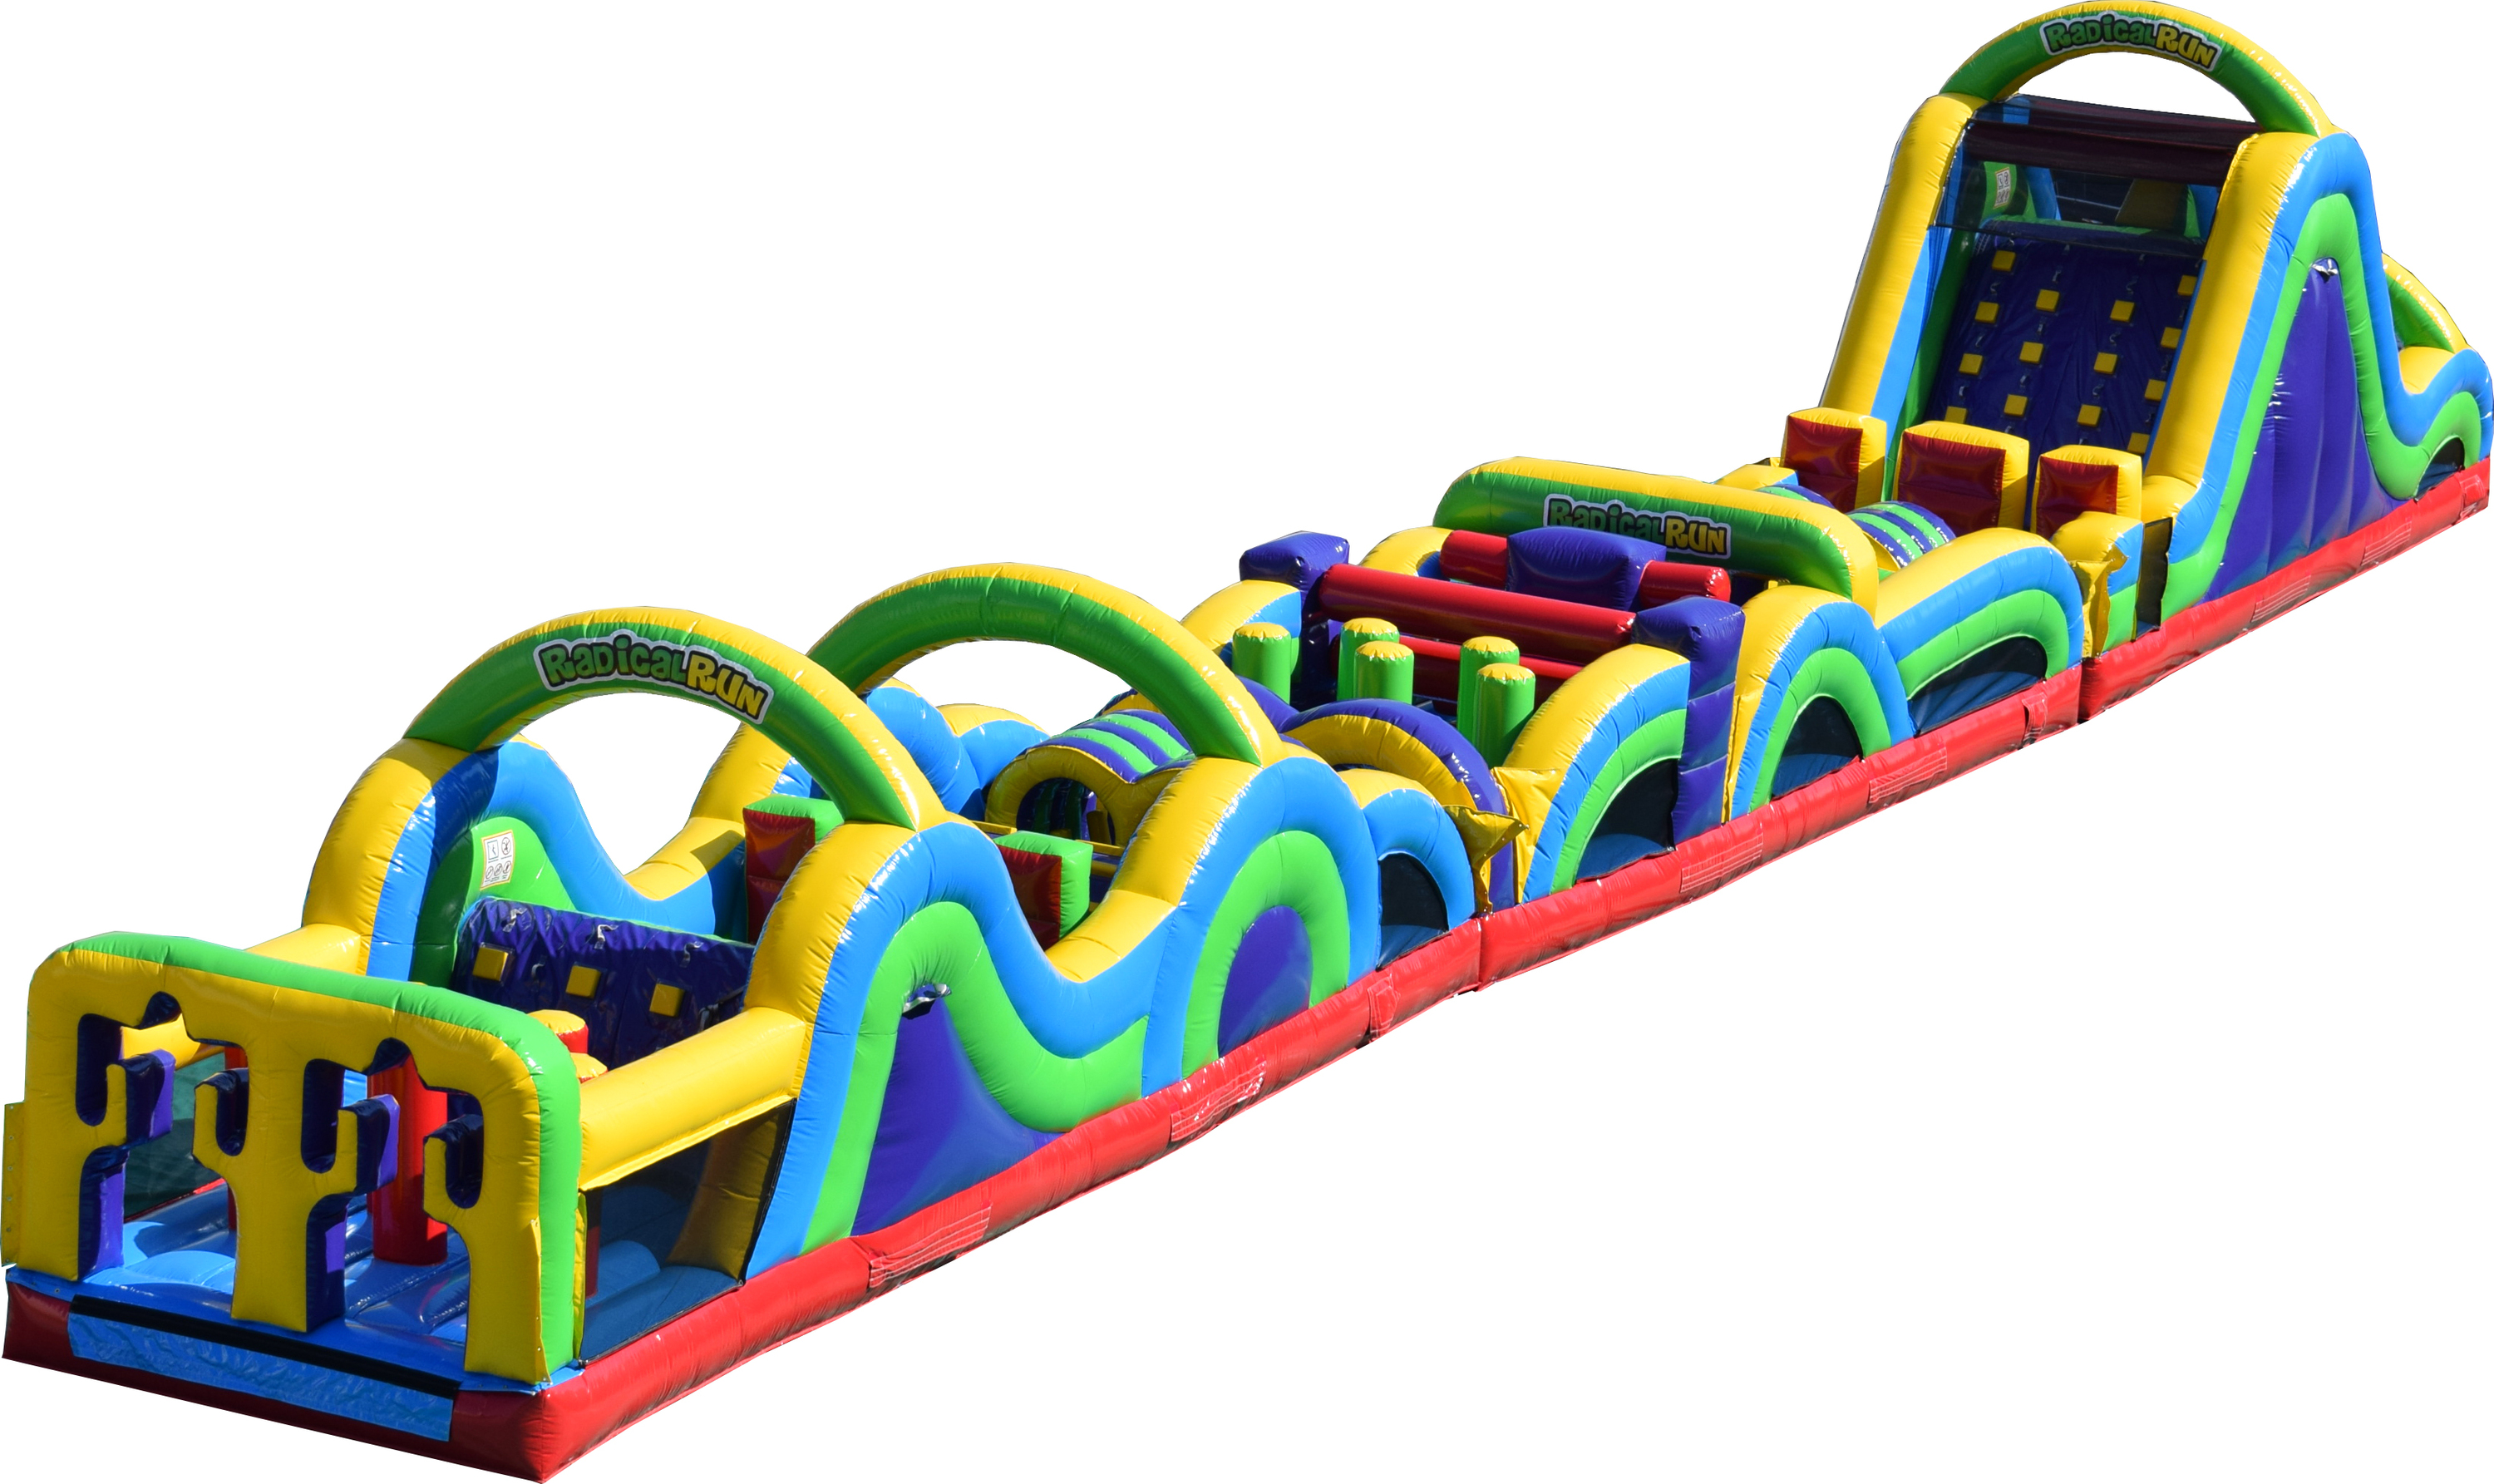 Obstacle course rentals